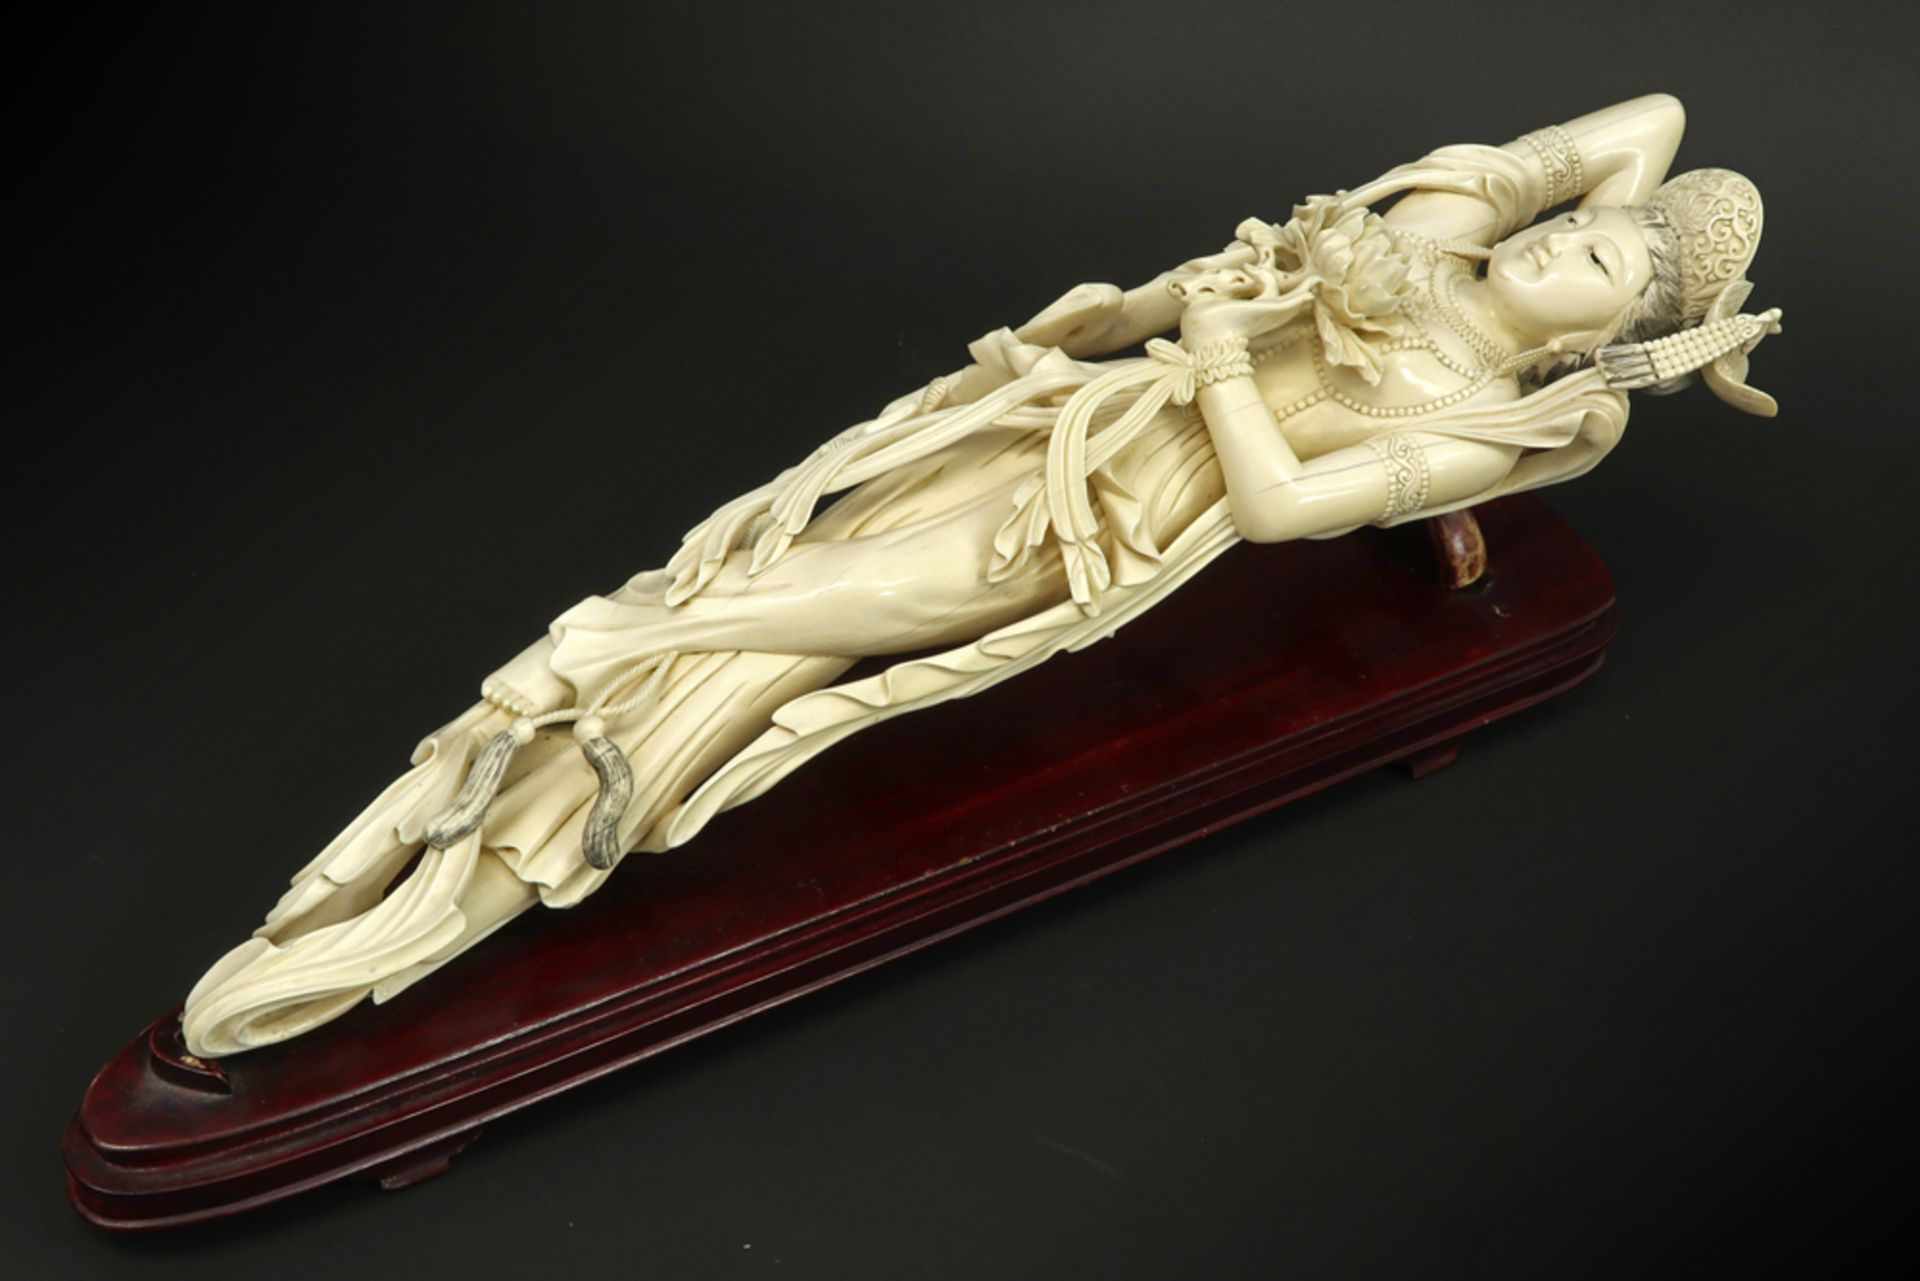 1920/30's Chinese "Reclining Quan Yin" sculpture in ivory on a wooden stand||Oude Chinese